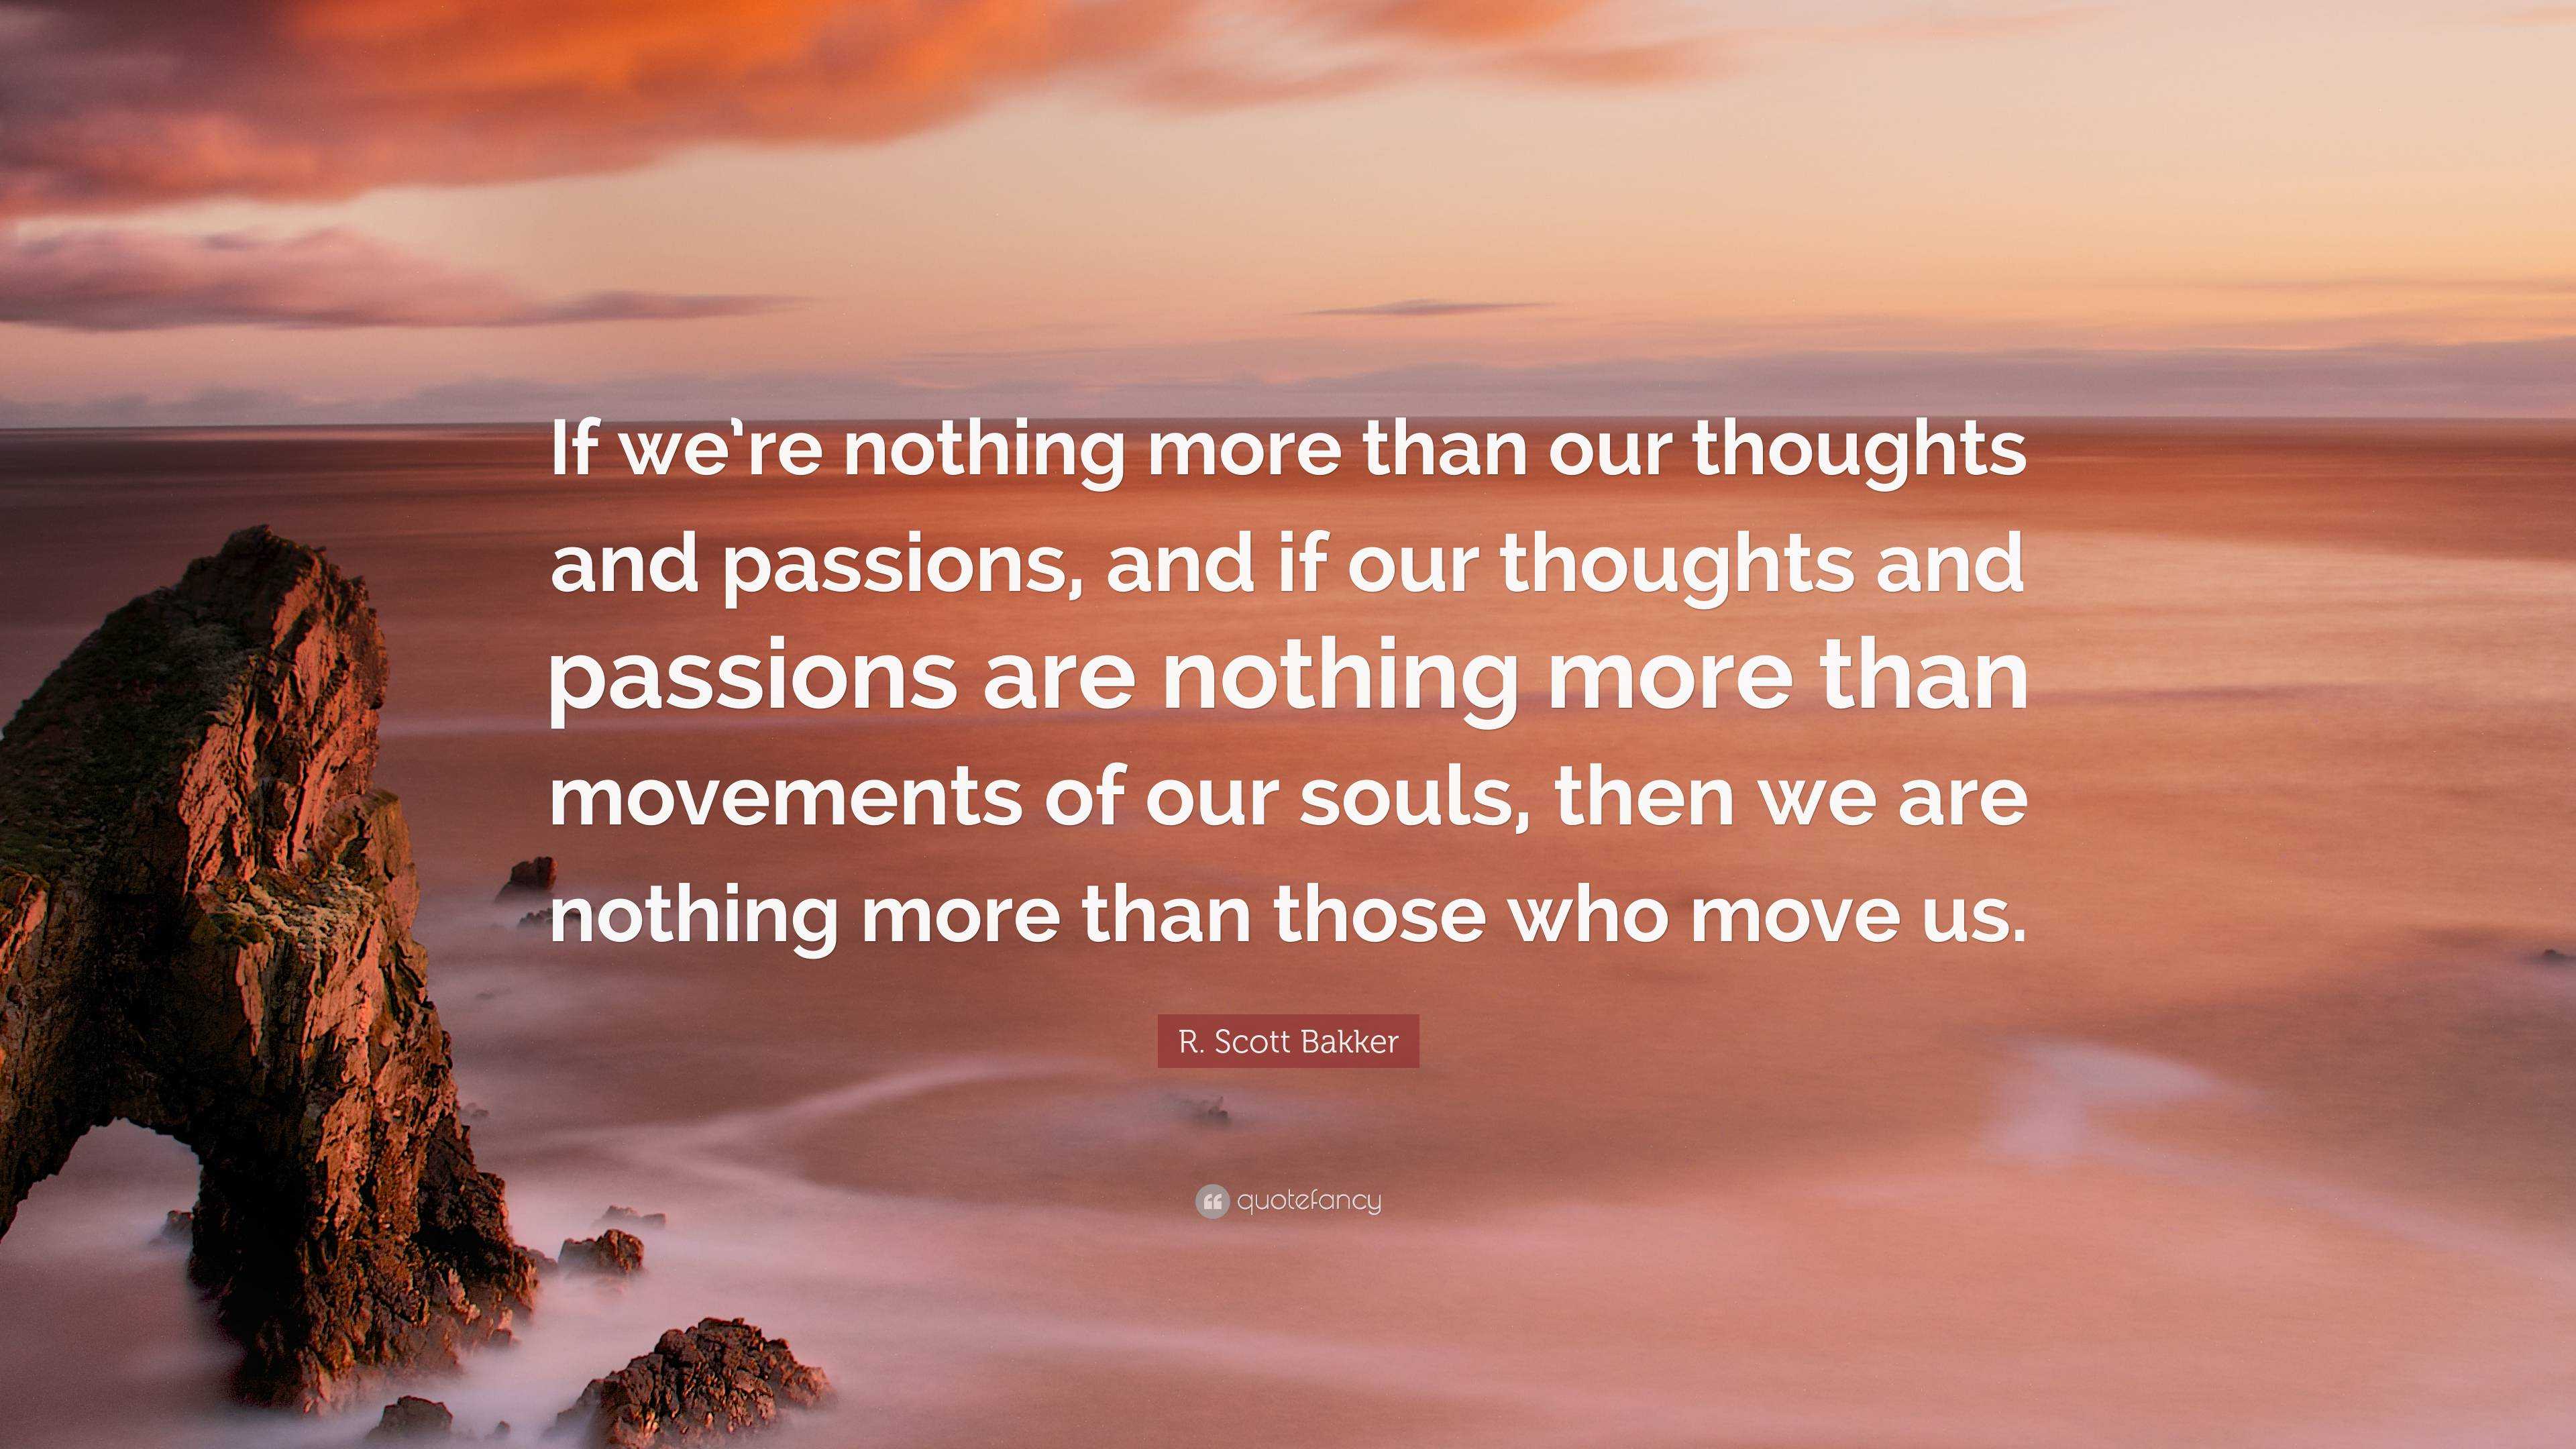 R. Scott Bakker Quote “If we’re nothing more than our thoughts and